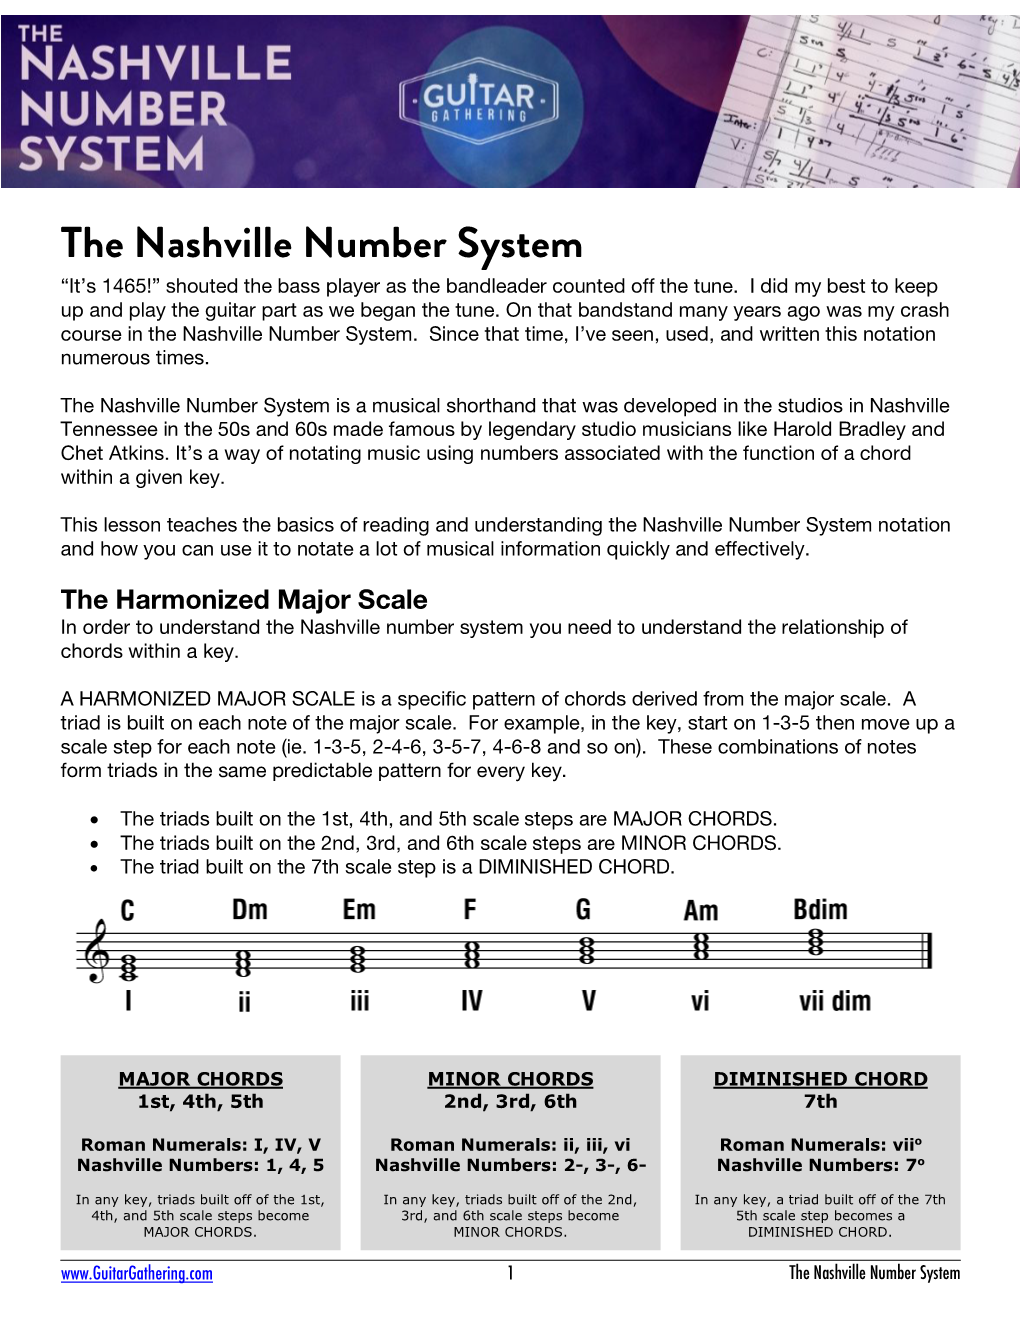 The Nashville Number System “It’S 1465!” Shouted the Bass Player As the Bandleader Counted Off the Tune